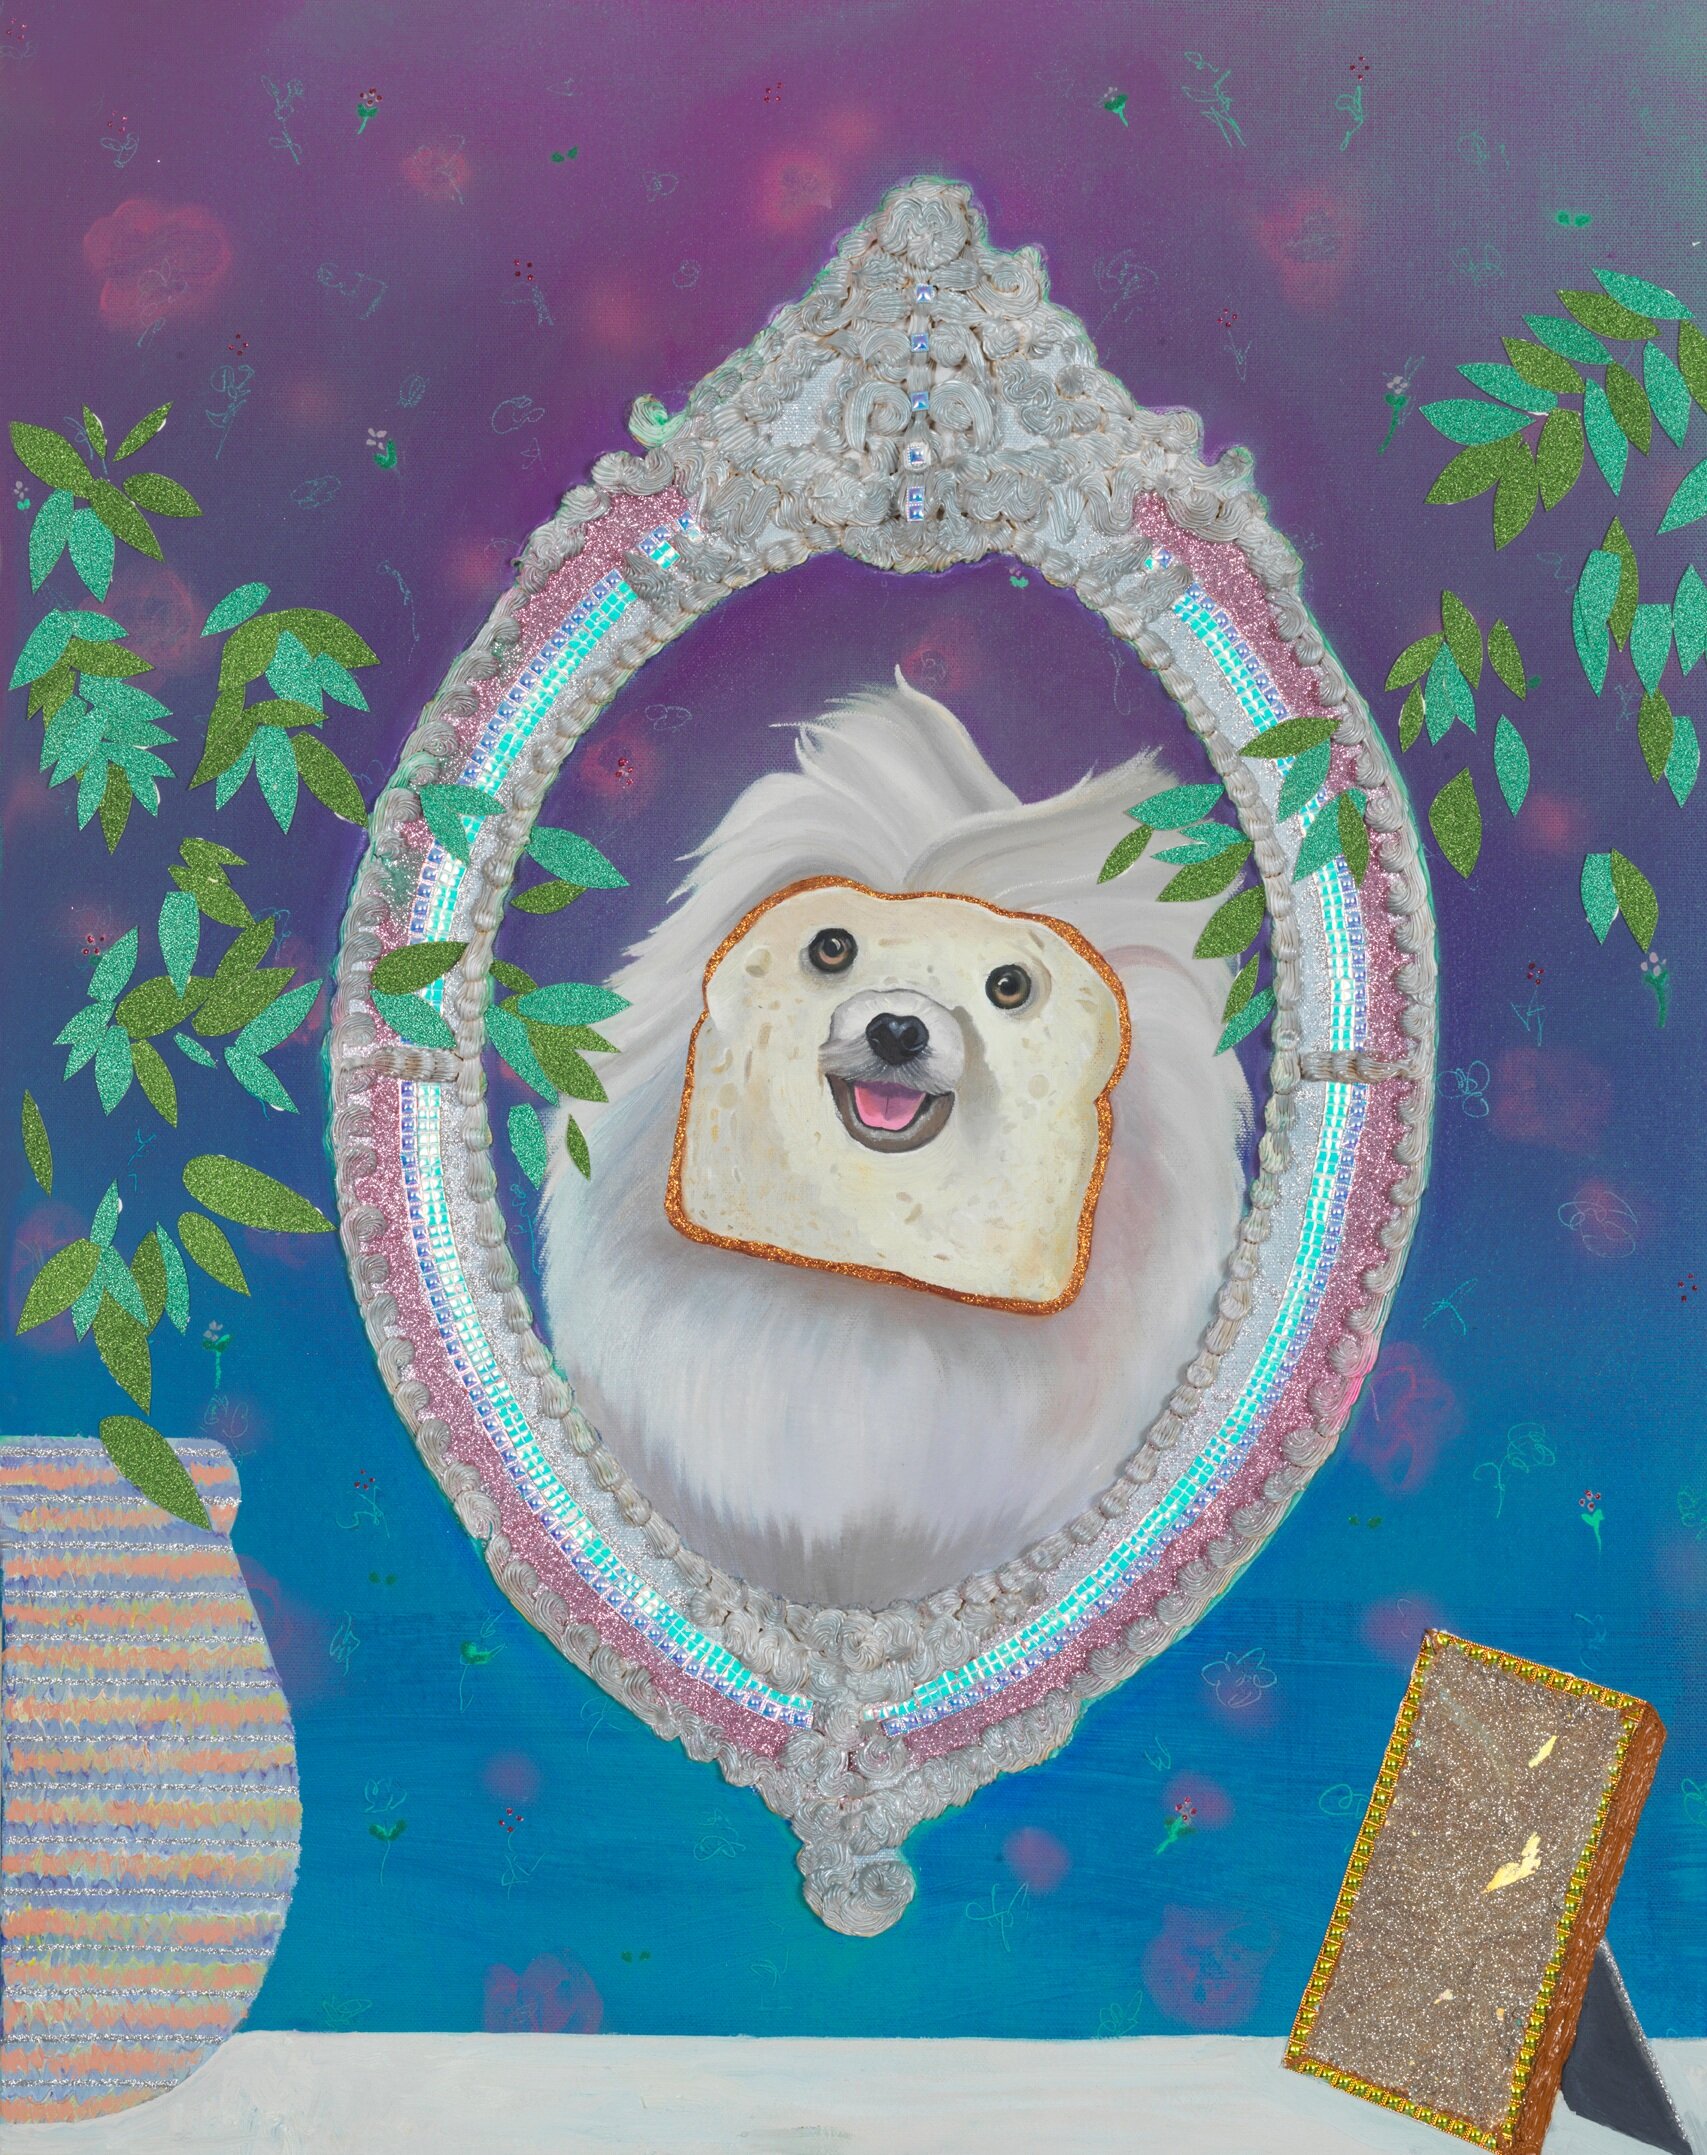 Pure Bread, mixed media and oil on canvas, 30" x 24", 2019